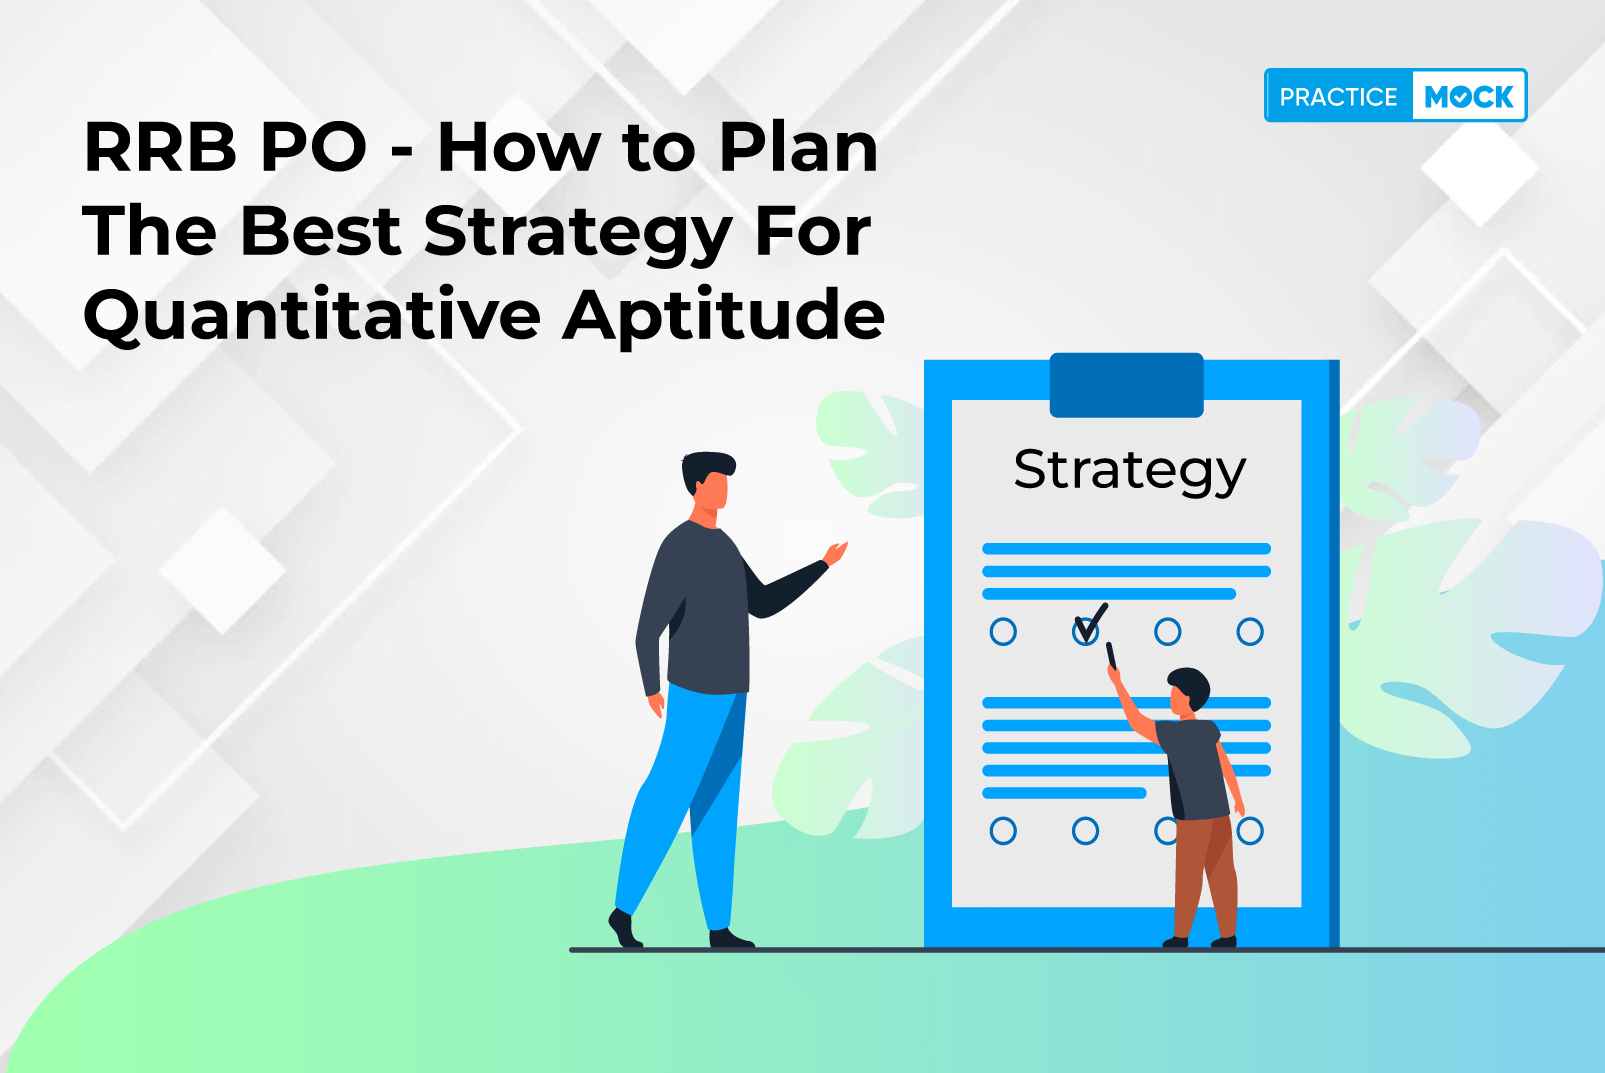 RRB PO - How to Plan the Best Strategy for Quantitative Aptitude